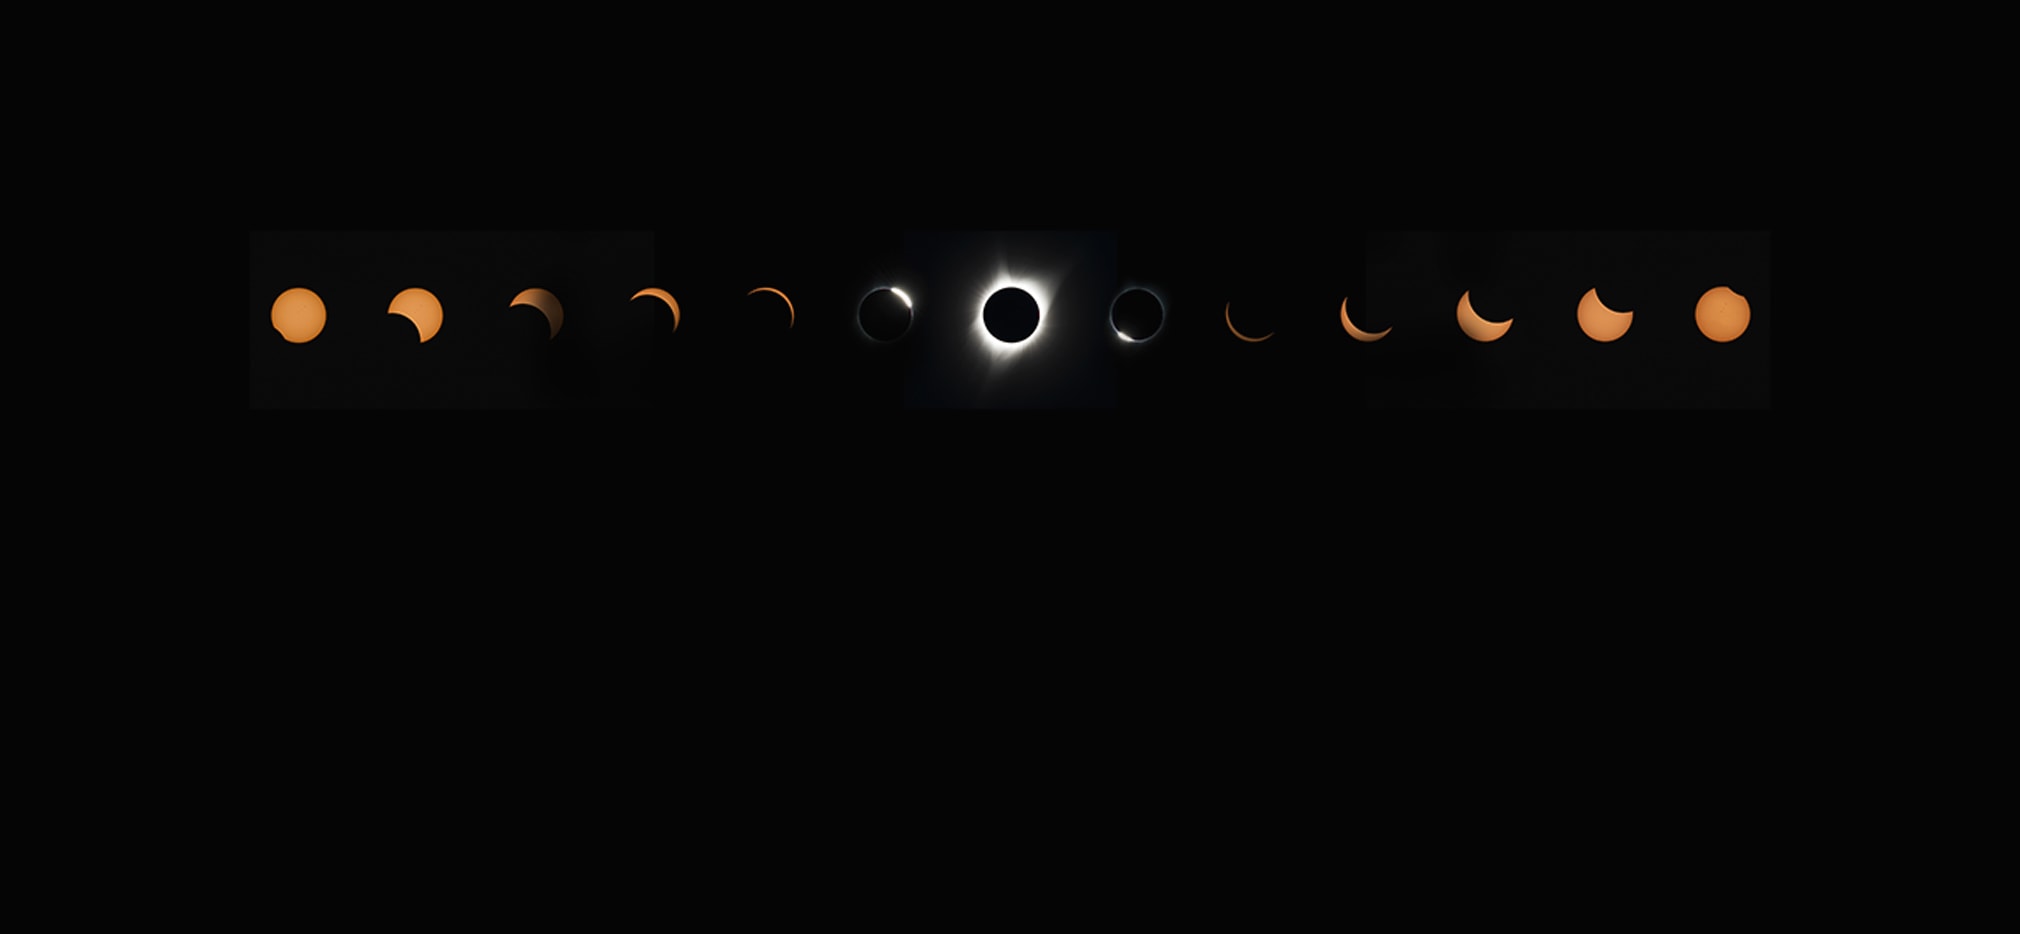 A line of 13 circles on a dark-sky background shows the progression of the sun and moon during a total eclipse. First the sun appears as a yellow disc in the sky. It first wanes into a crescent shape, then a sliver, then a speck as it is eclipsed by the moon’s black silhouette. When the yellow disc of the sun is finally completely obscured by the moon, the corona pops into view as white tendrils of light around the edge of the moon’s silhouette. Then the corona disappears as the moon slides out of view, and the sun waxes back into speck, a sliver, a crescent and finally a full disc.